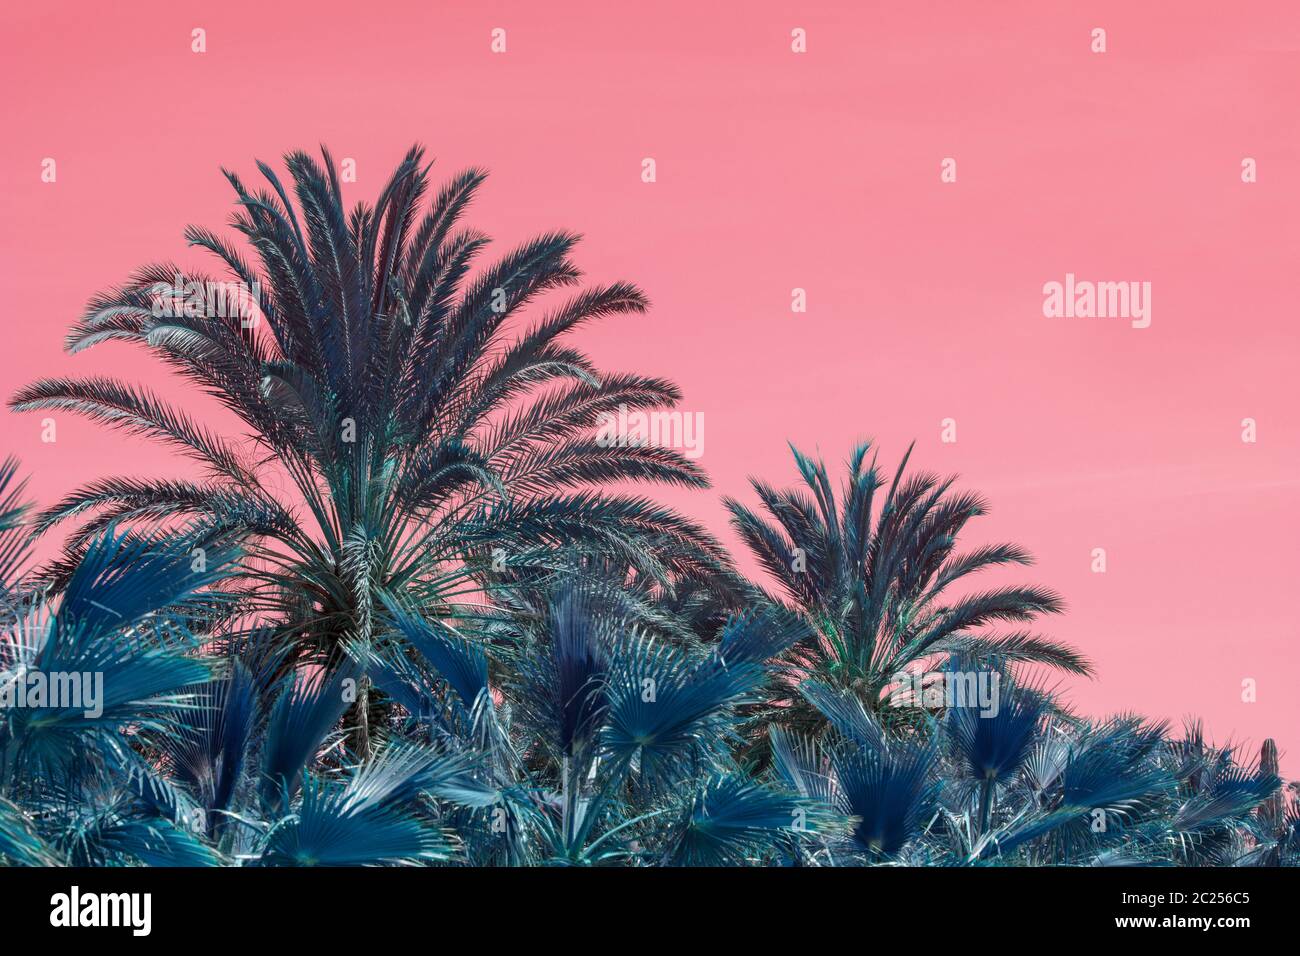 Surrealistic abstract palms against pink skies Stock Photo